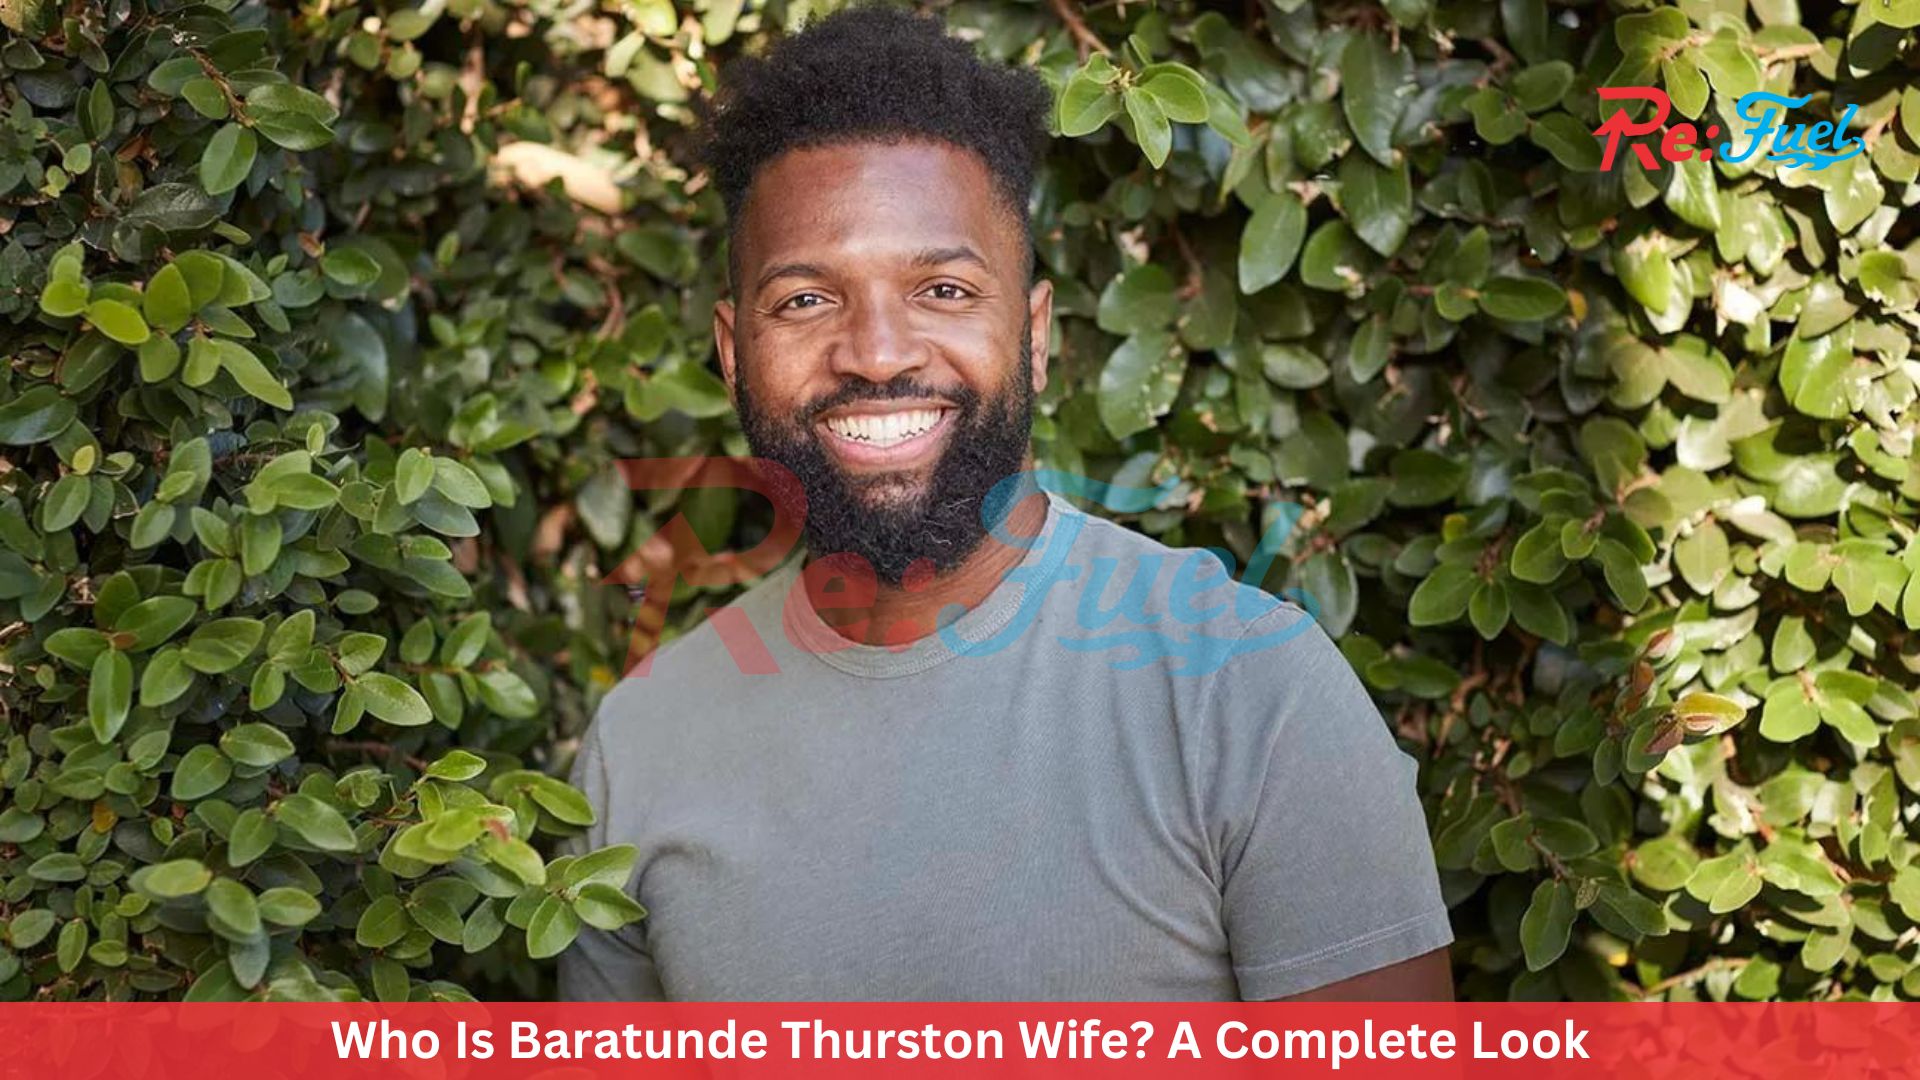 Who Is Baratunde Thurston Wife? A Complete Look